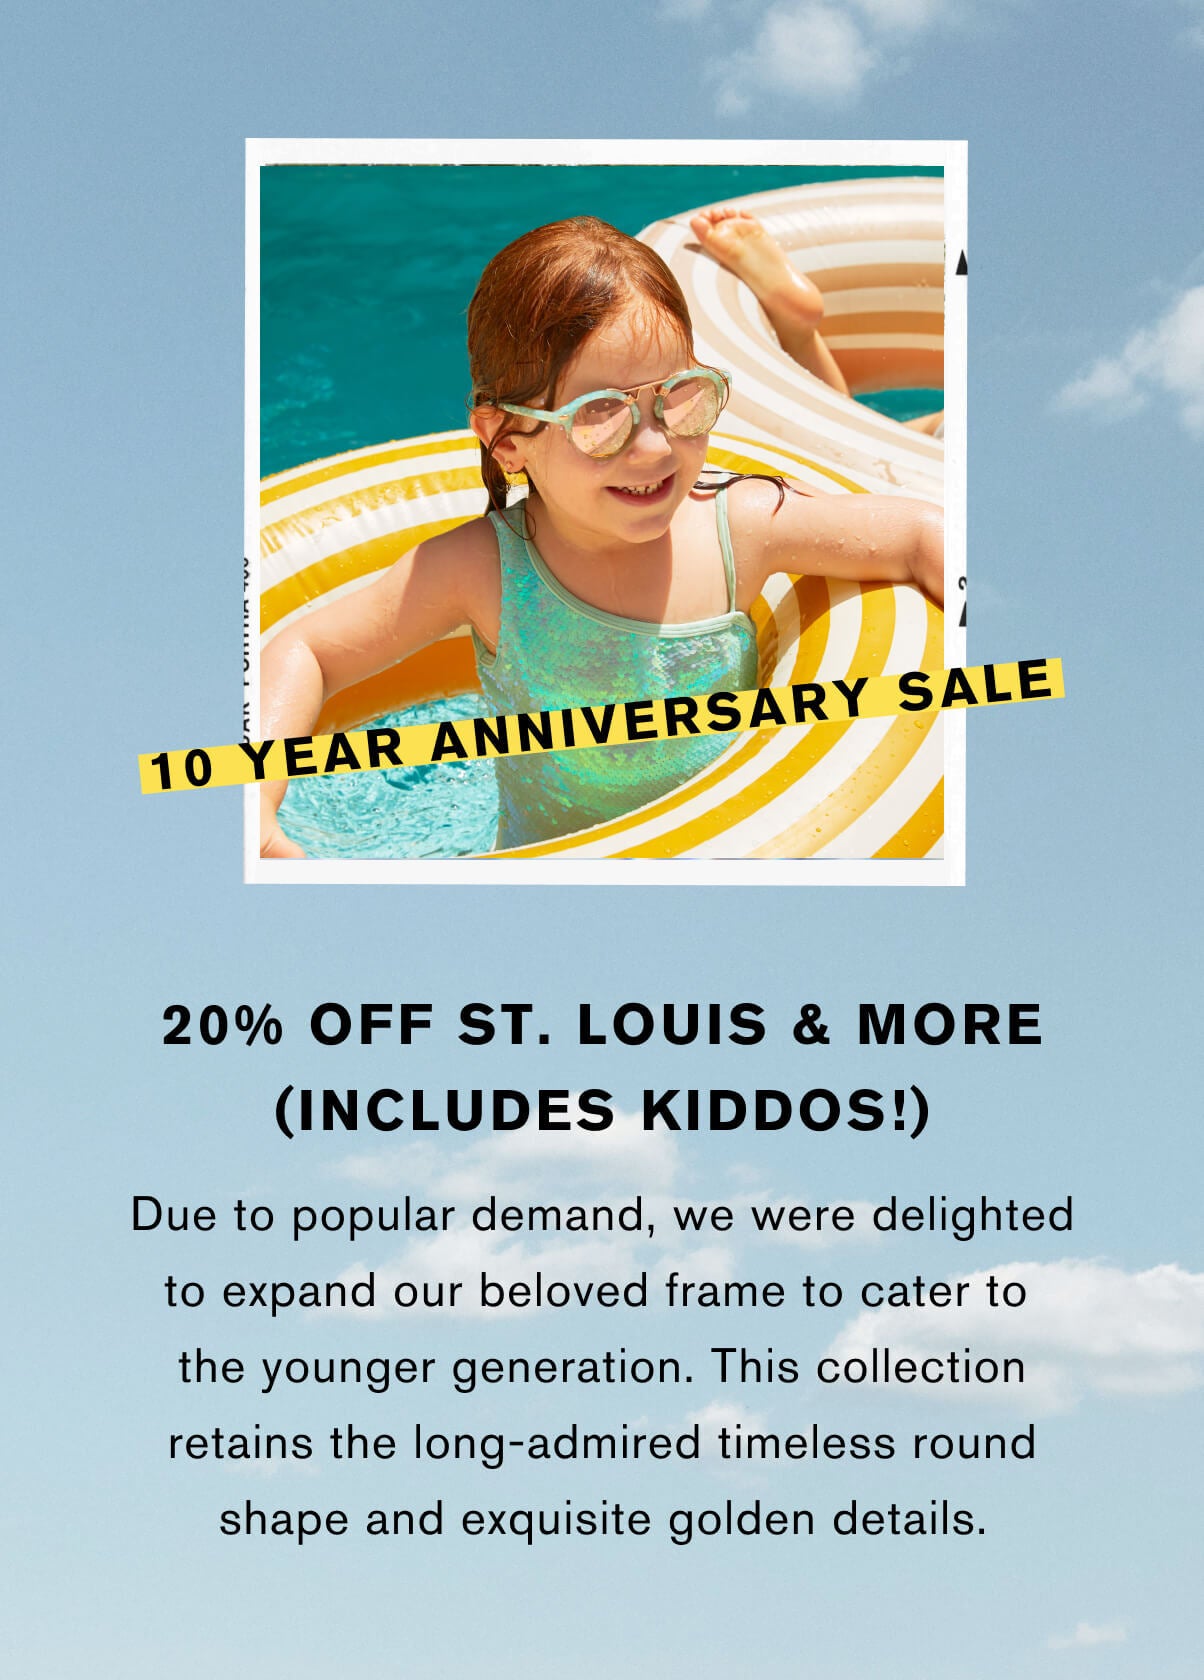 20% off St. Louis & more  due to popular demand, we were delighted to expand our beloved frame to cater to the younger generation. This collection retains the long-admired timeless round shape and exquisite golden details.